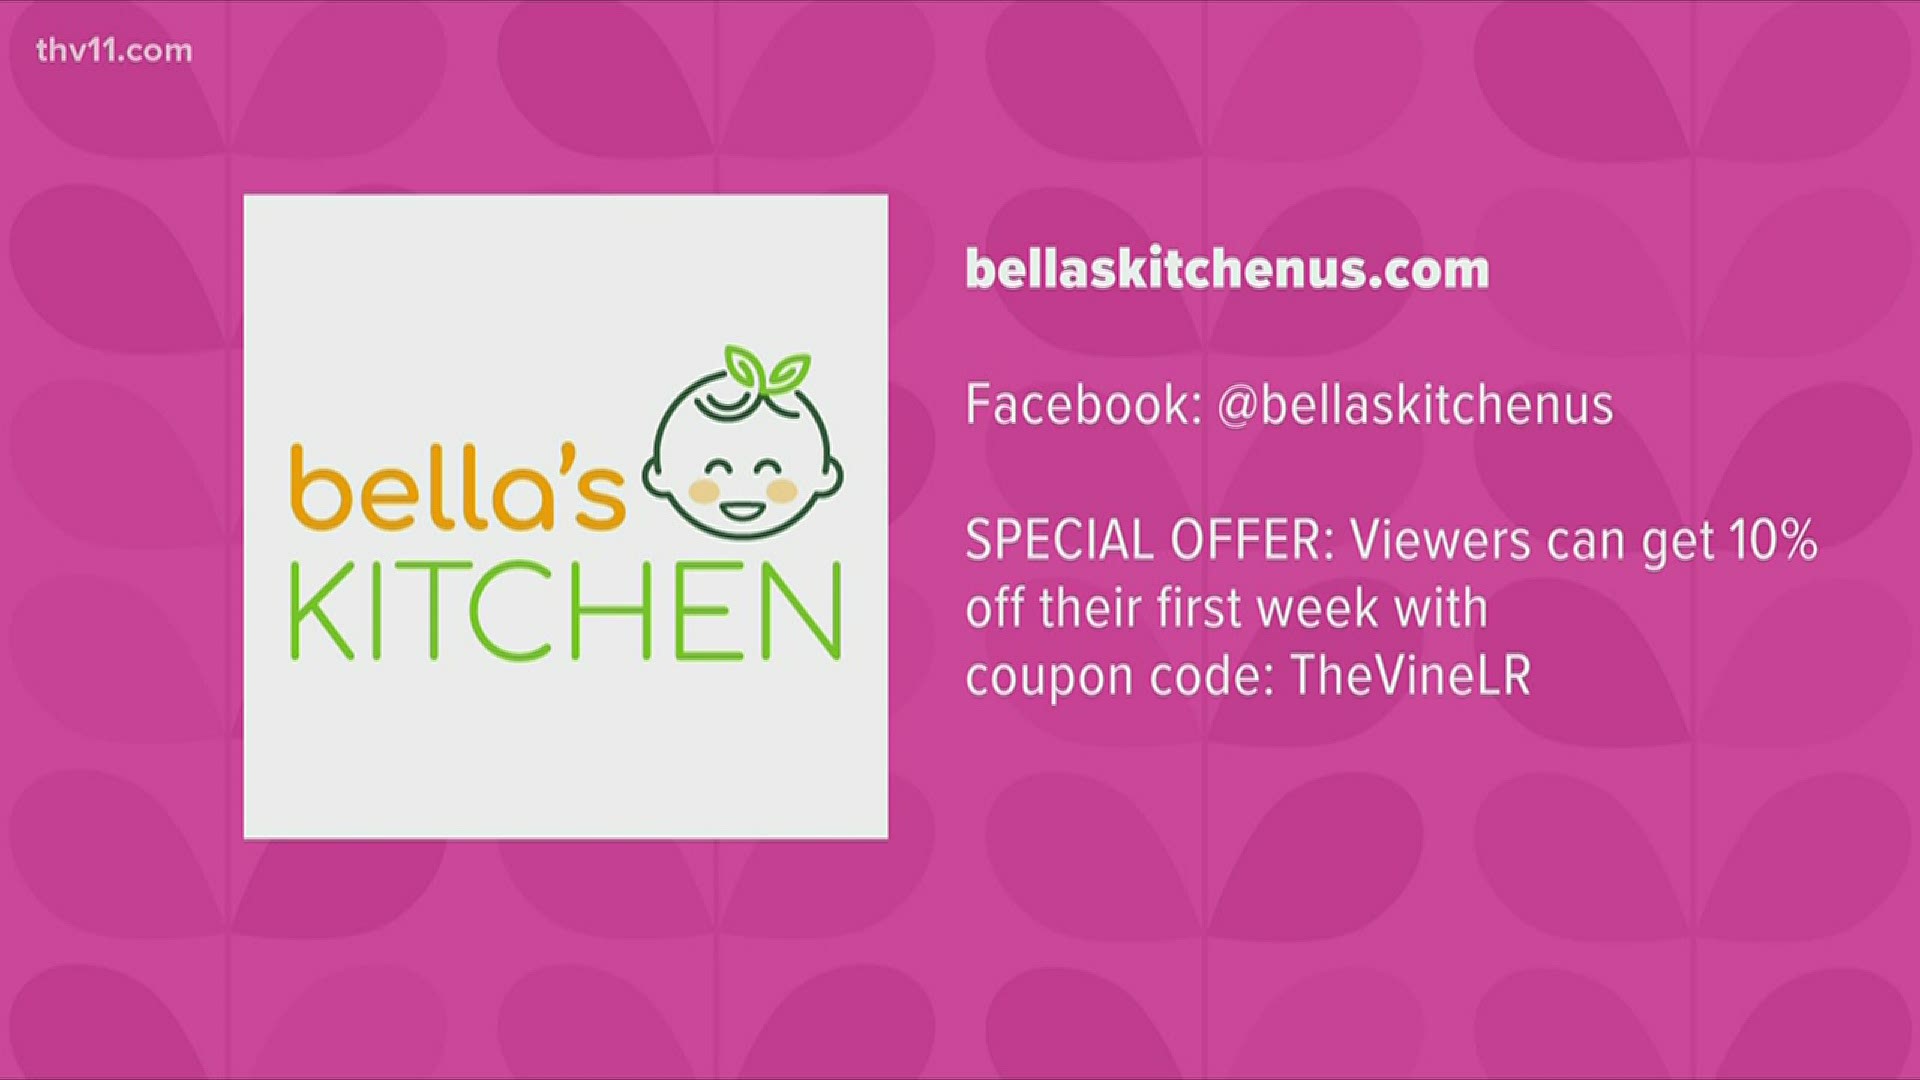 Sara Hurst, owner of Bella's Kitchen, shows us how to make a delicious Apple Bread that doesn't require flour!